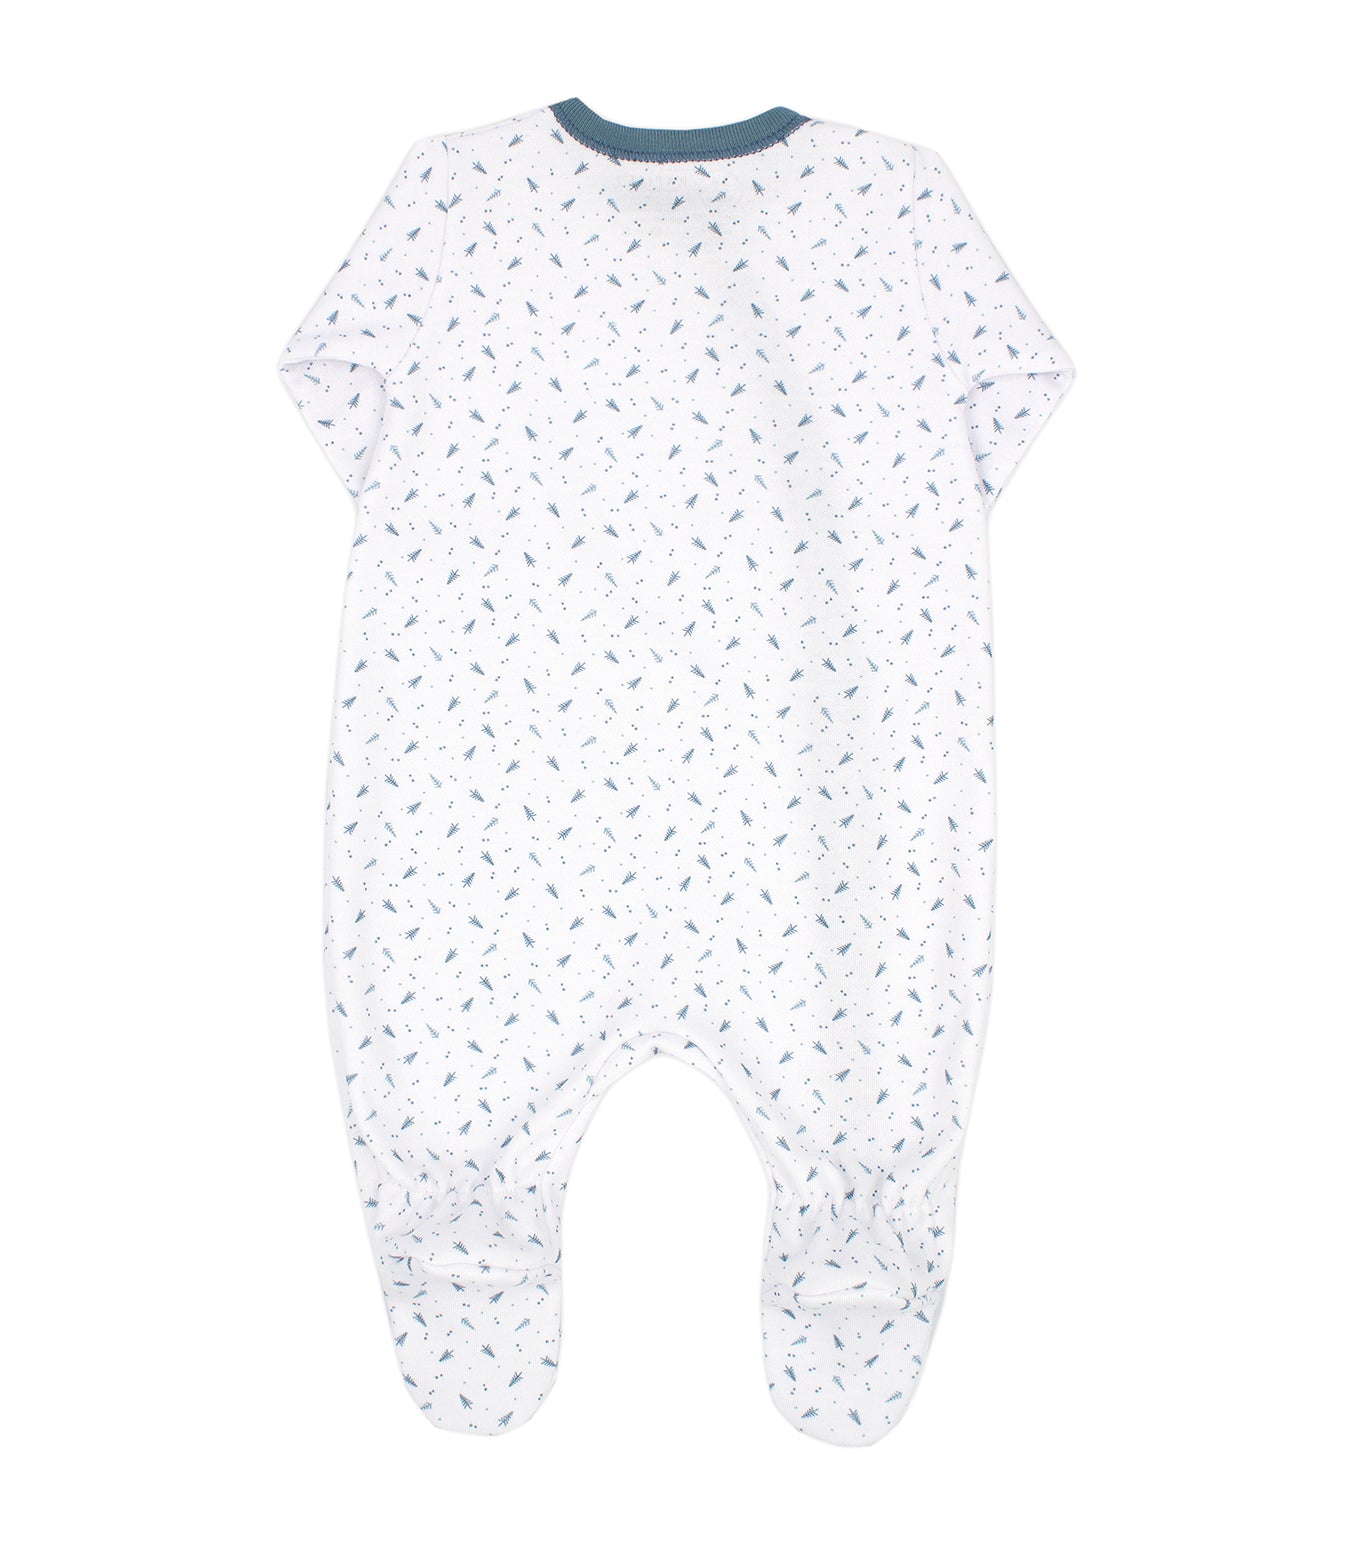 Evergreen and White Sleepsuit